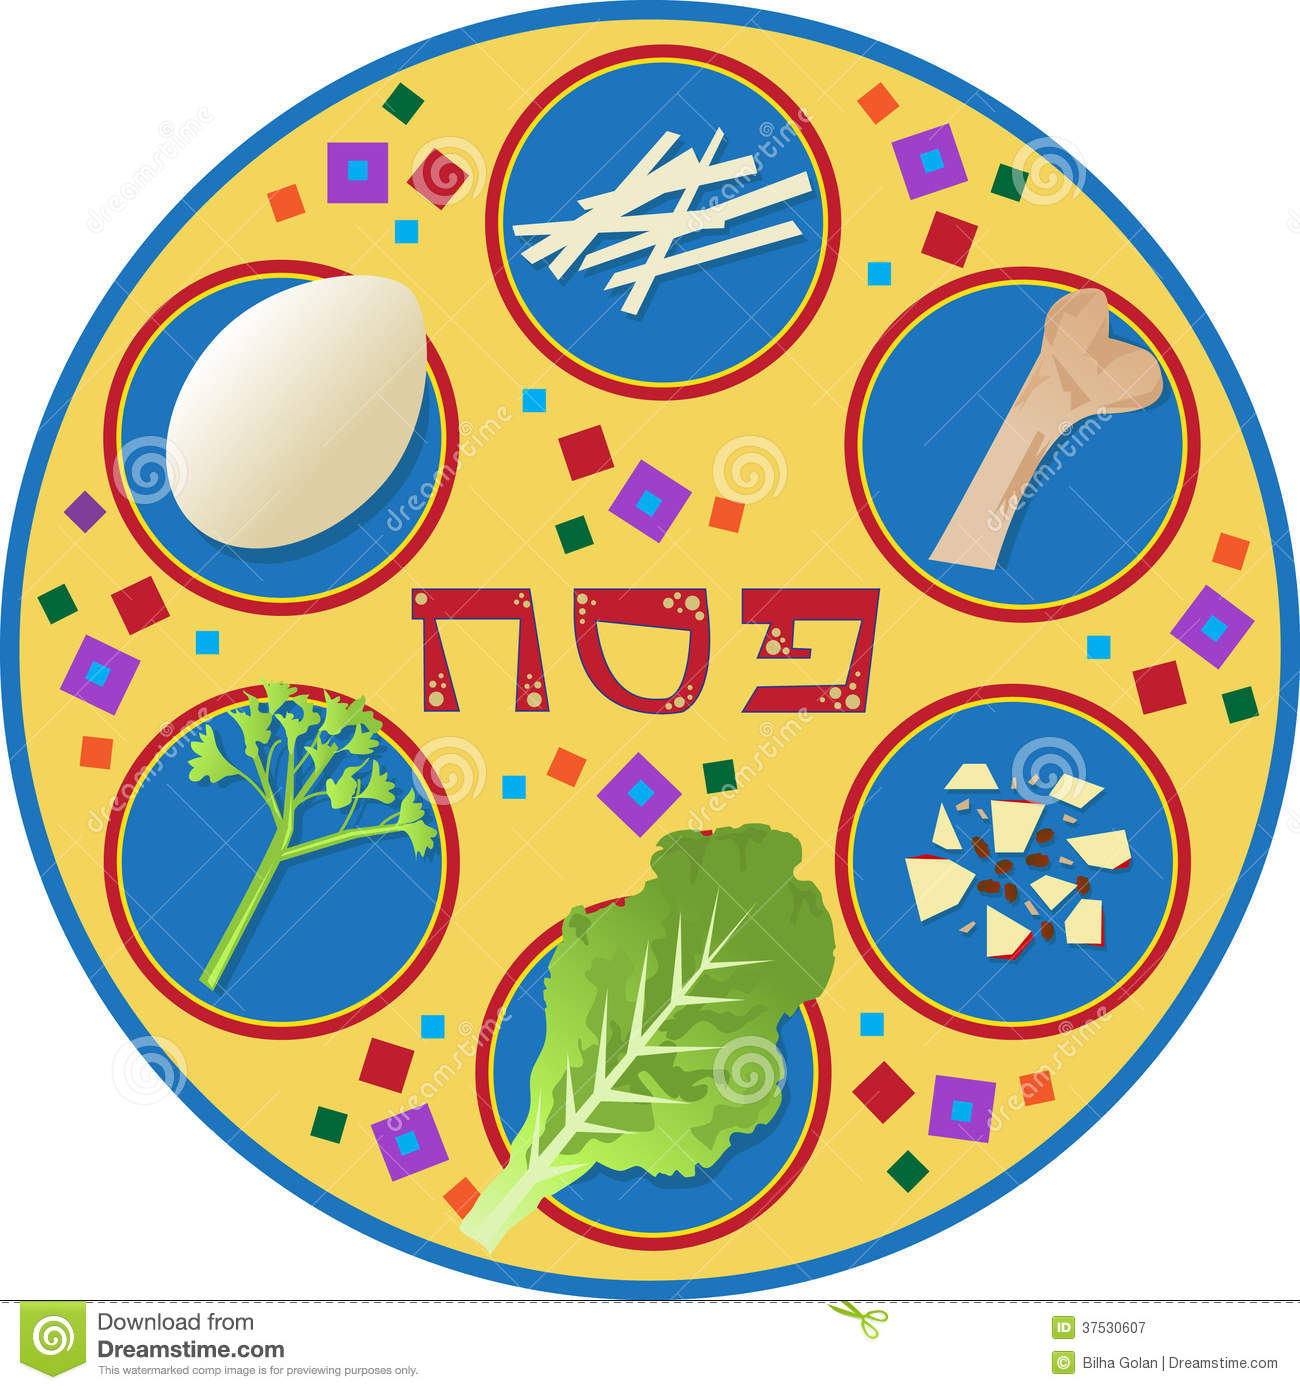 Passover Plate Royalty Free Stock Photography   Image  37530607